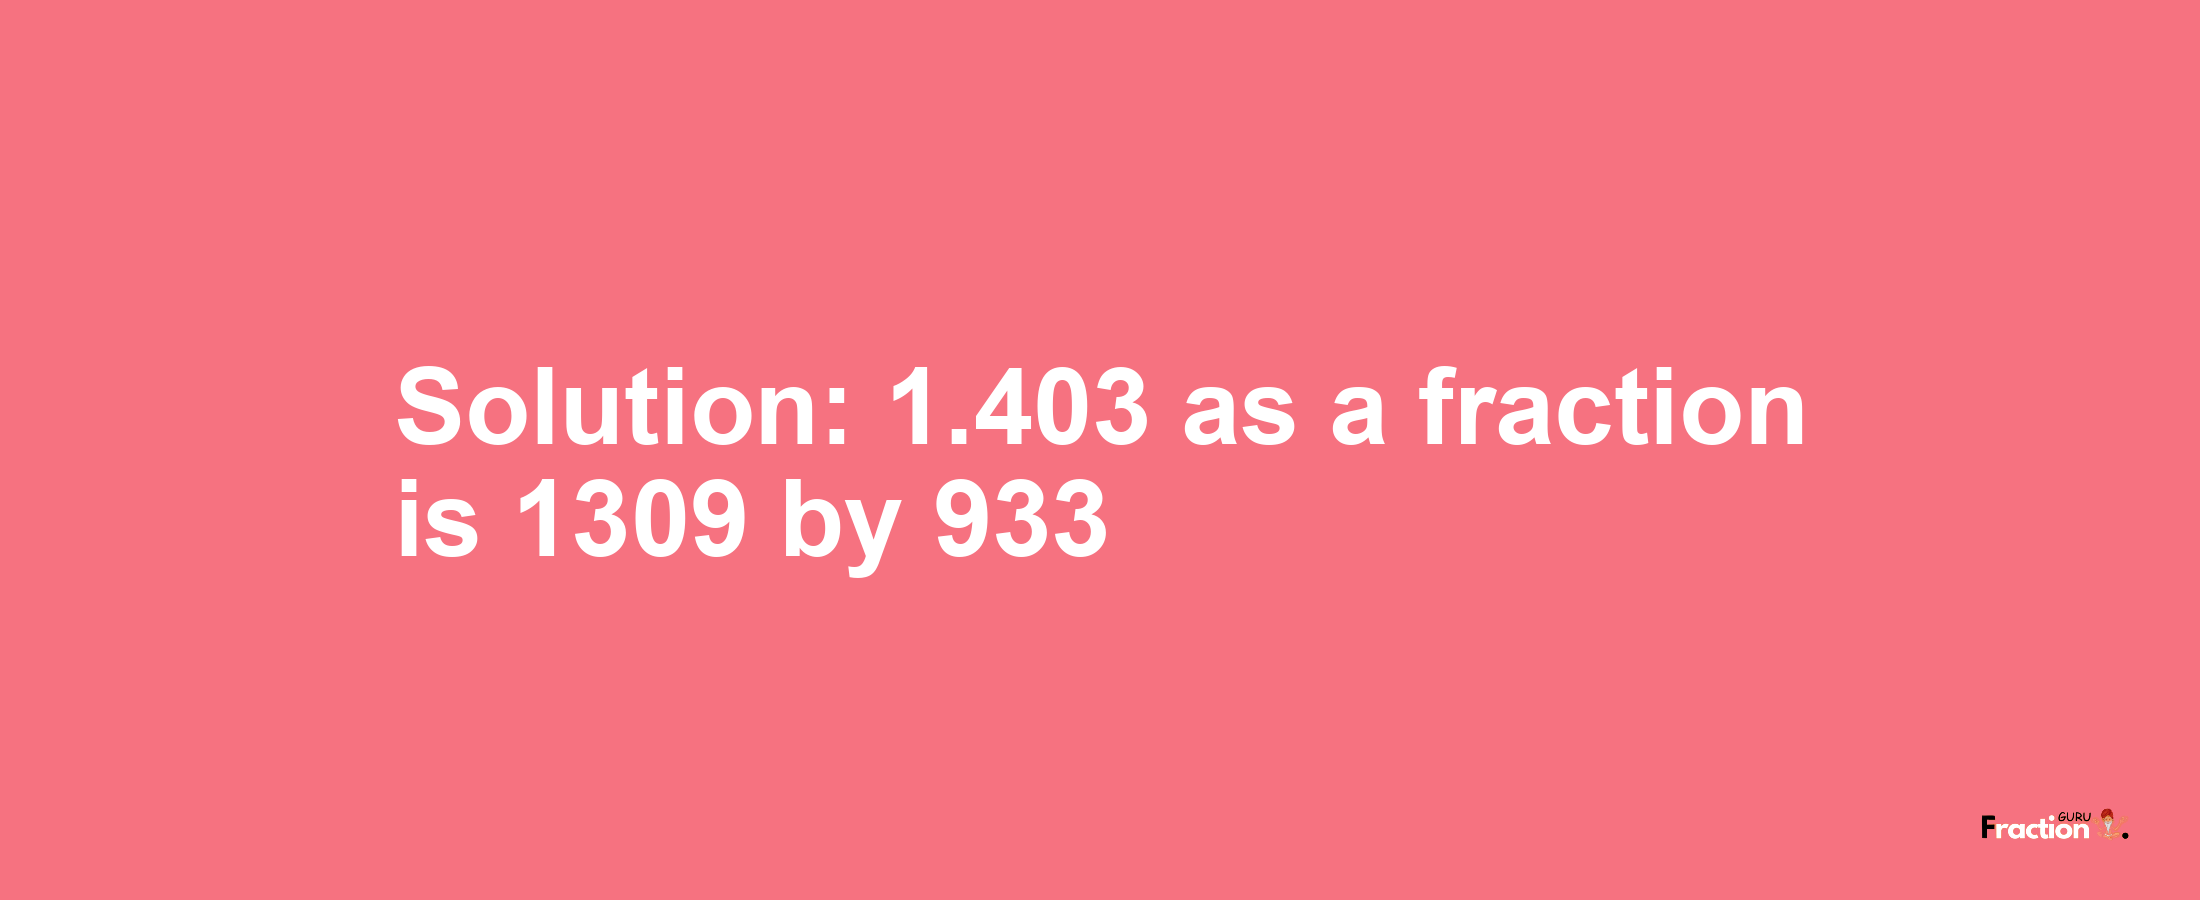 Solution:1.403 as a fraction is 1309/933